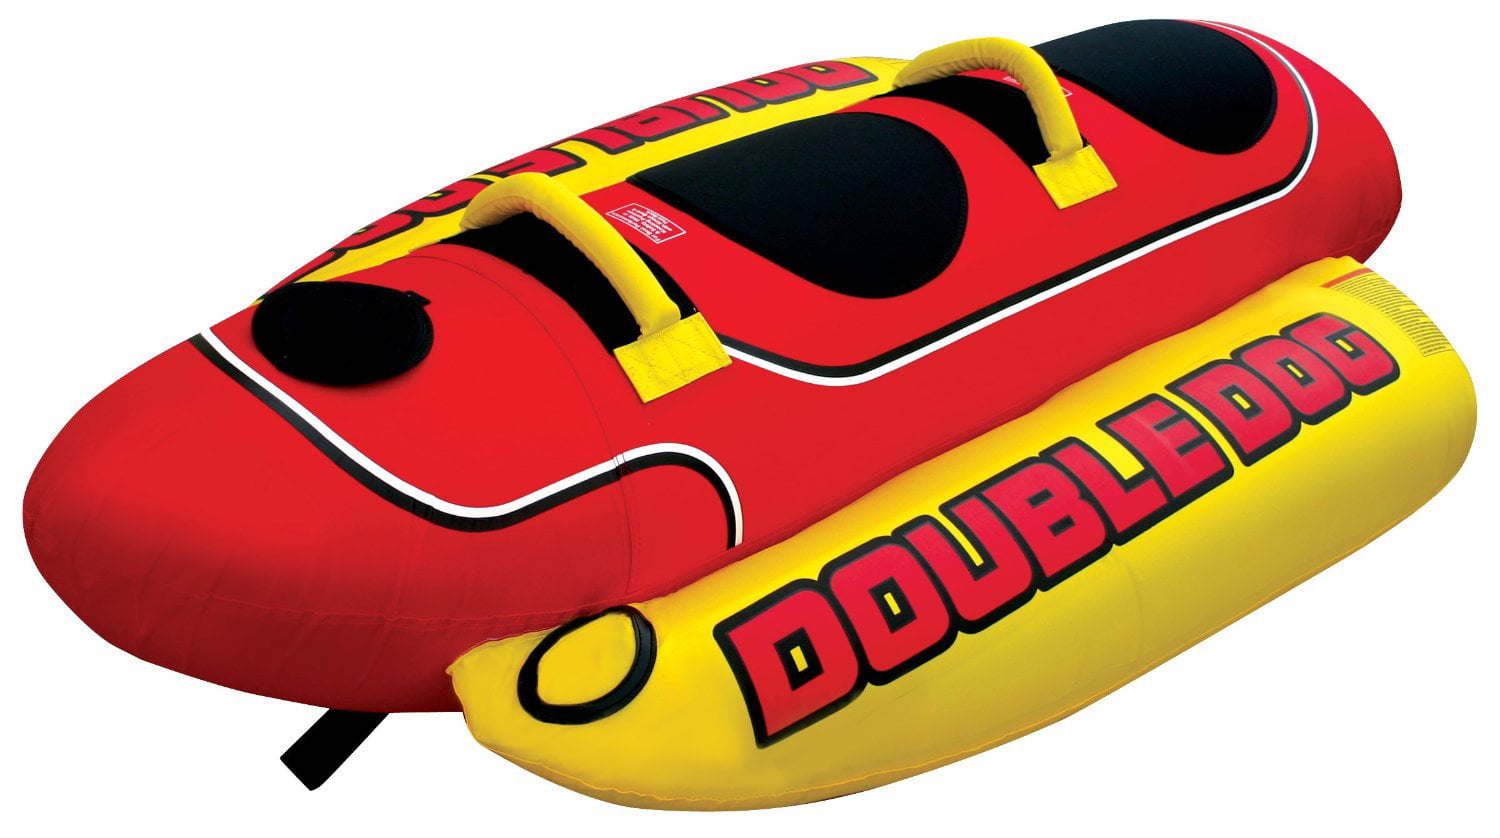 Airhead Double Dog 1 to 2 Rider Inflatable Towable Tube - SportsGO